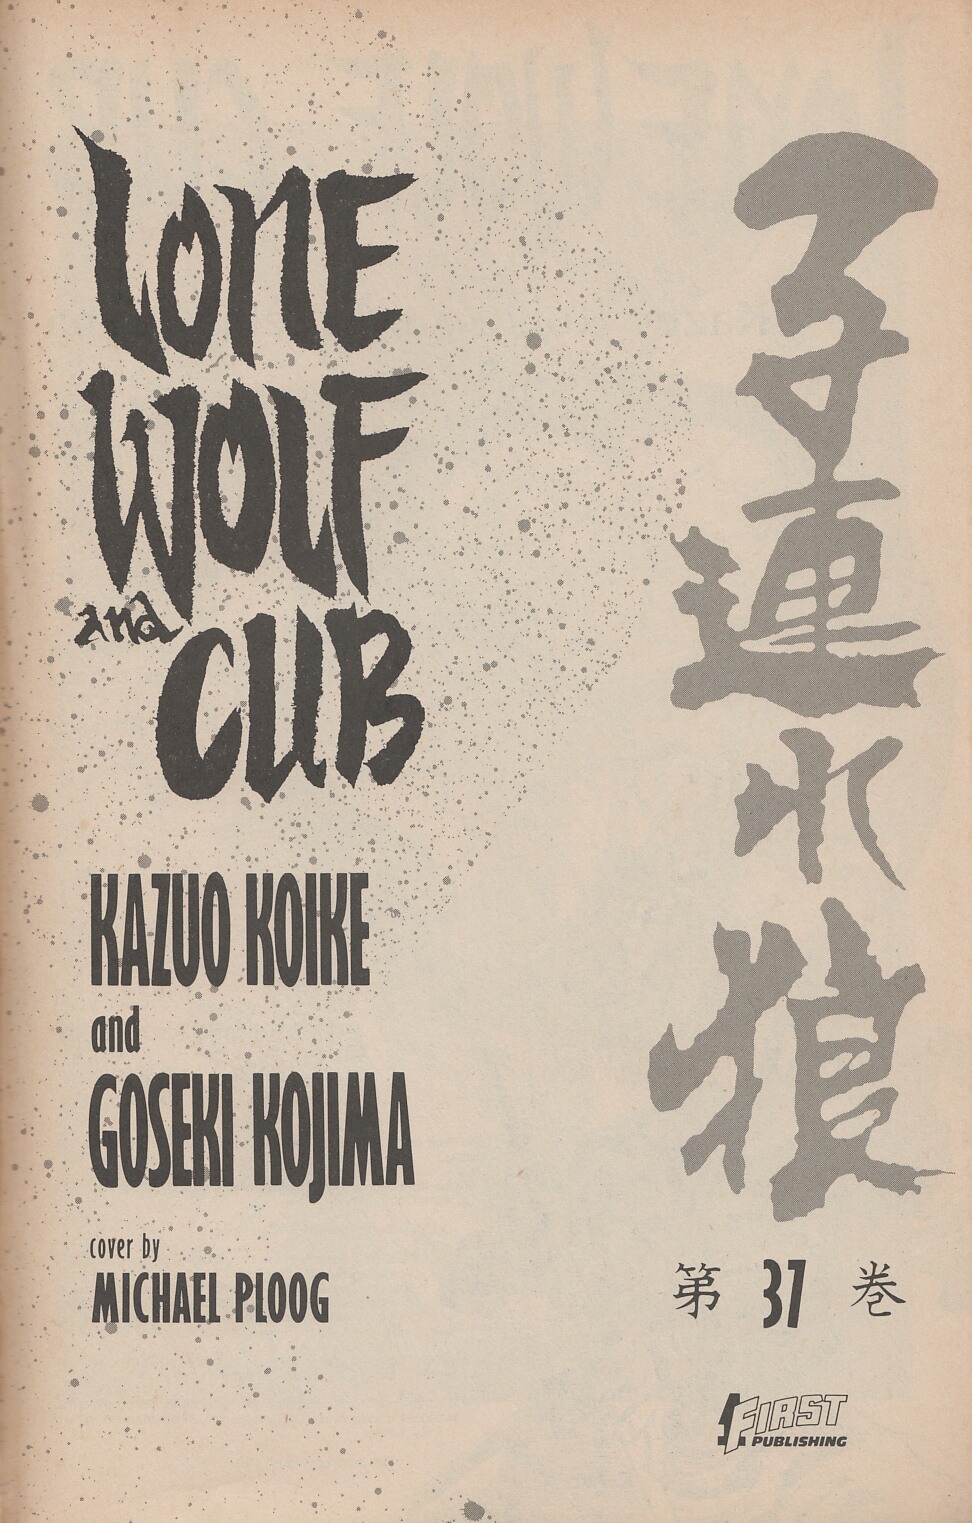 Read online Lone Wolf and Cub comic -  Issue #37 - 2